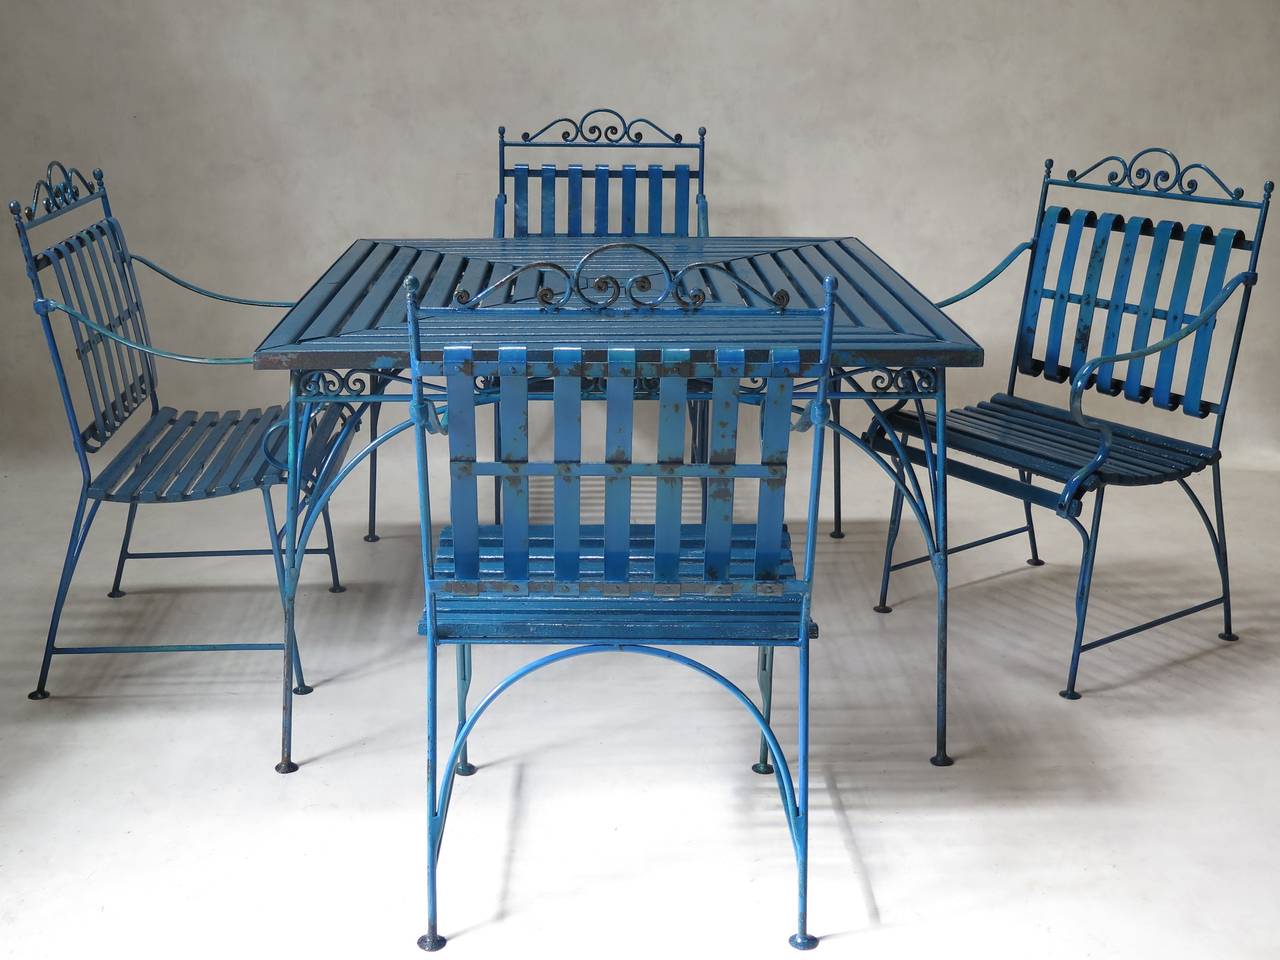 Elegant and unusual outdoor/garden dining set, comprised of a large square table and four large armchairs. The structure is made of hand-wrought iron, and the table top and chair seats are made of wooden slats.

There is a hole in the table centre